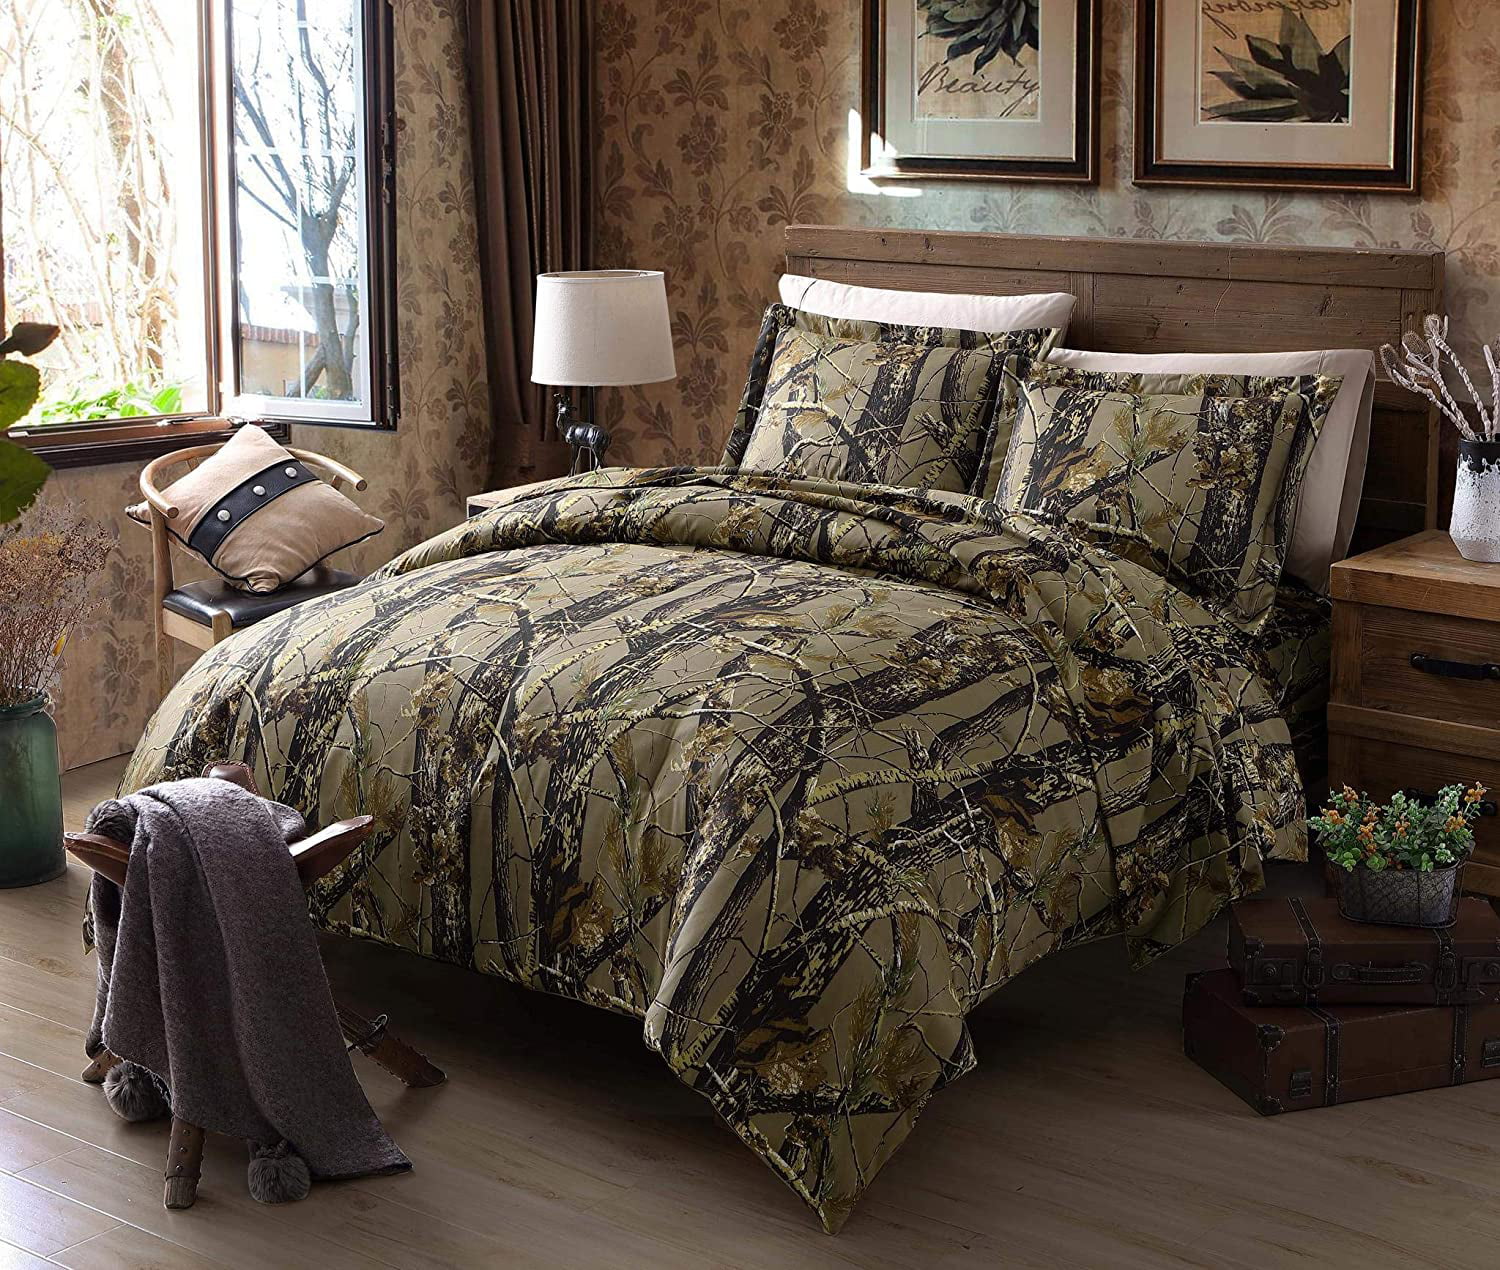 Details about   Bedding Comforter Set Mossy Oak Camouflage Queen Size Bed in a Bag Bedroom Sleep 